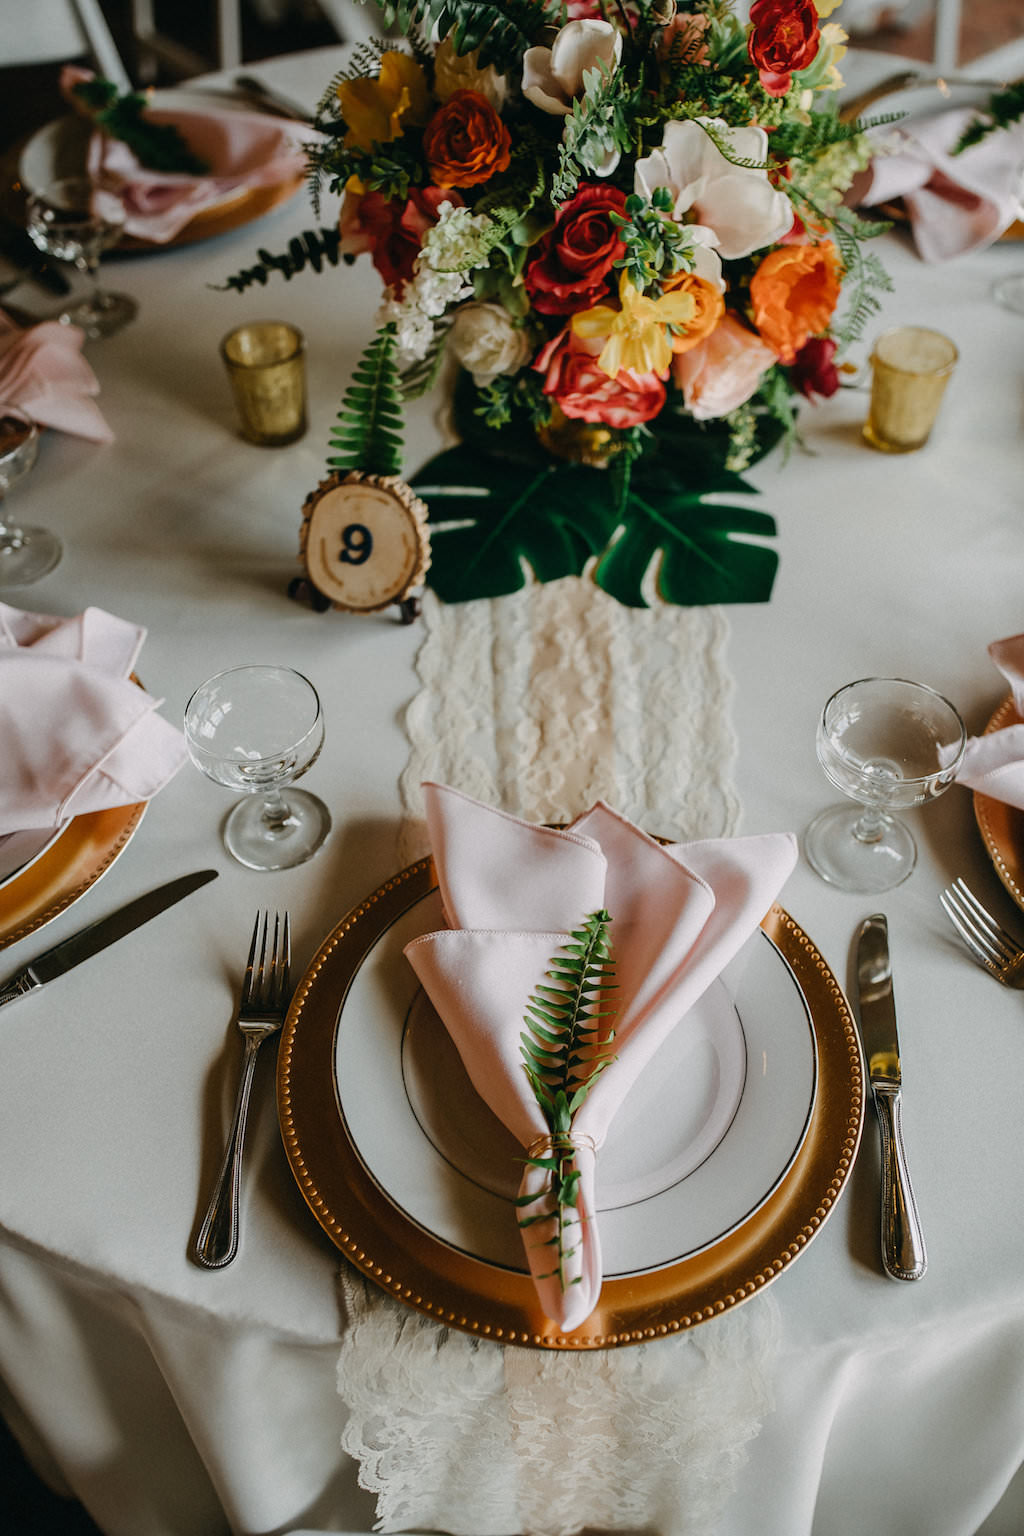 Tropical Inspired Wedding Reception Decor, Gold Charger, Blush Pink Linen with Green Leaf, Red, Yellow, Orange, White and Greenery Floral Bouquet on Palm Fronds and Lace Table Runner | Tampa Bay Photographer Rad Red Creative